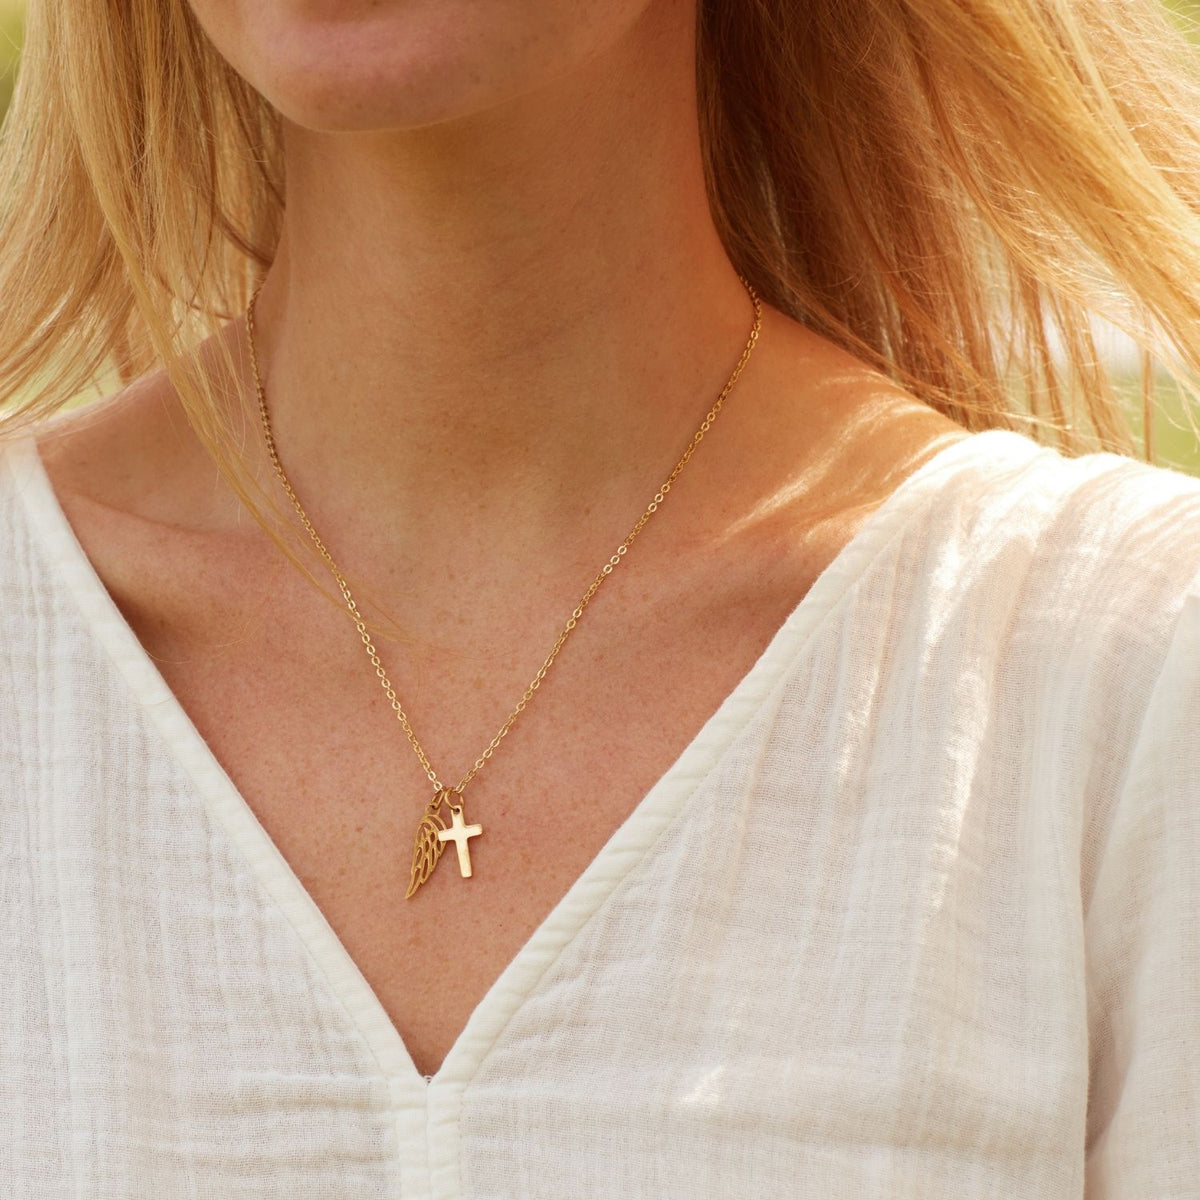 To the Best Mother in Law (From Daughter in Law) | Man of My Dreams | Cross Necklace